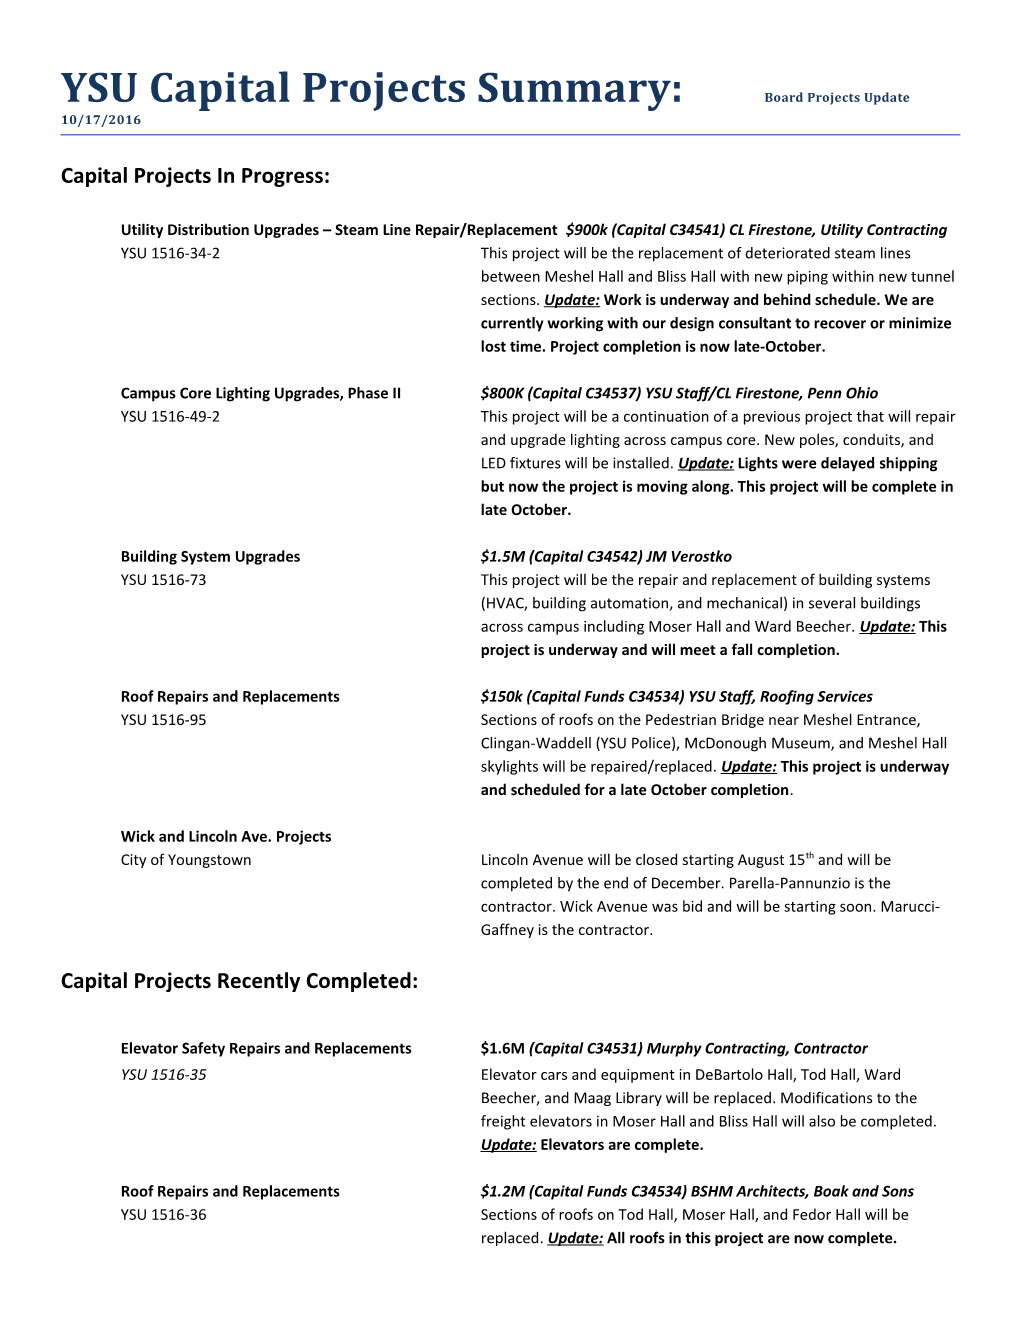 YSU Capital Projects Summary: Board Projects Update 10/17/2016